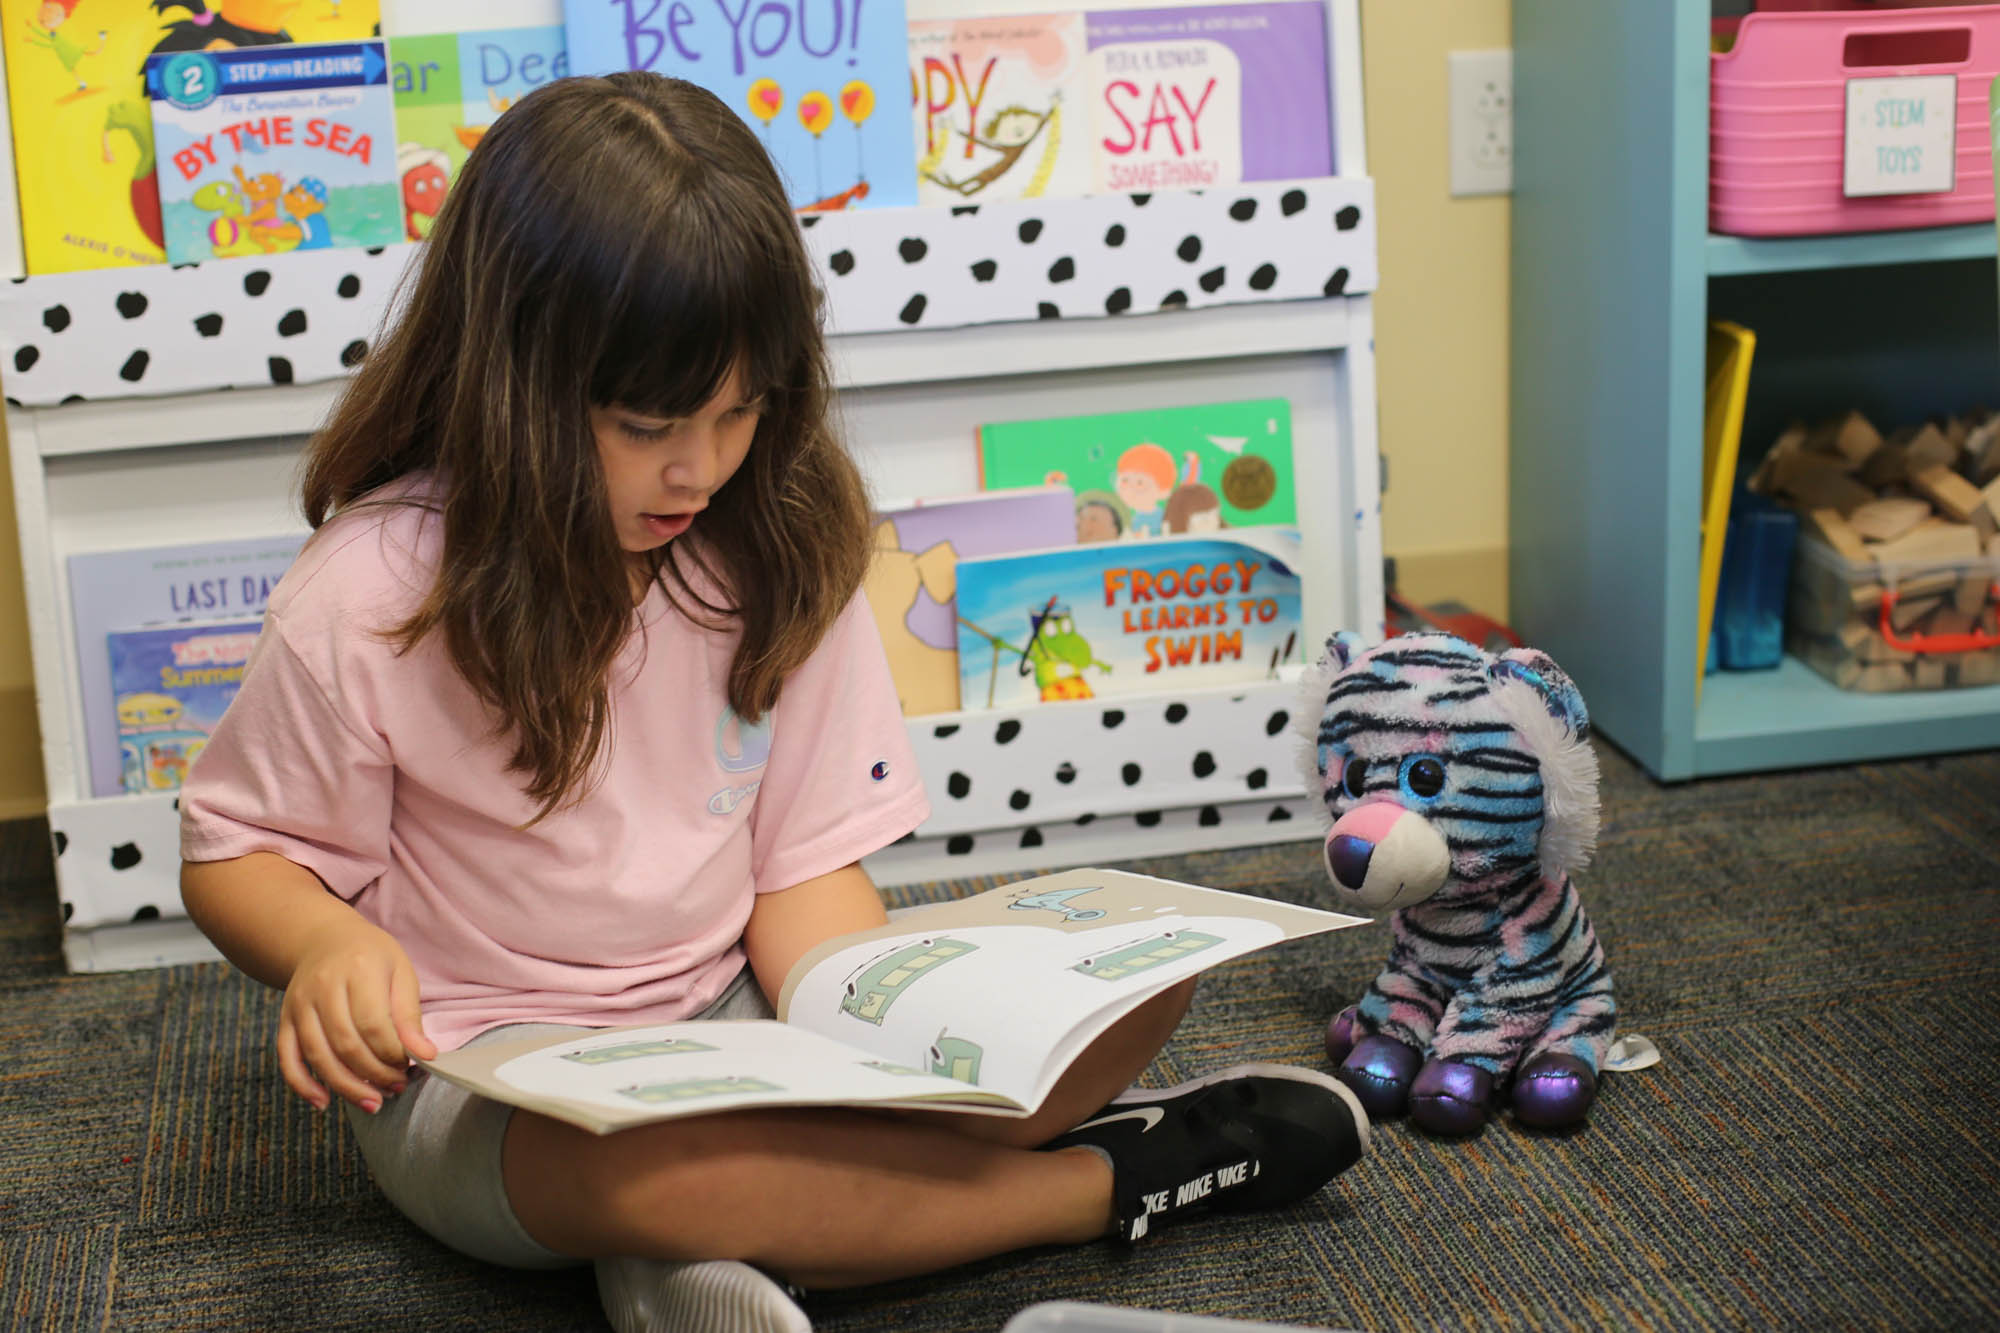 A young girl in a pink shirt reads on the floor of the classroom in front of a bookcase